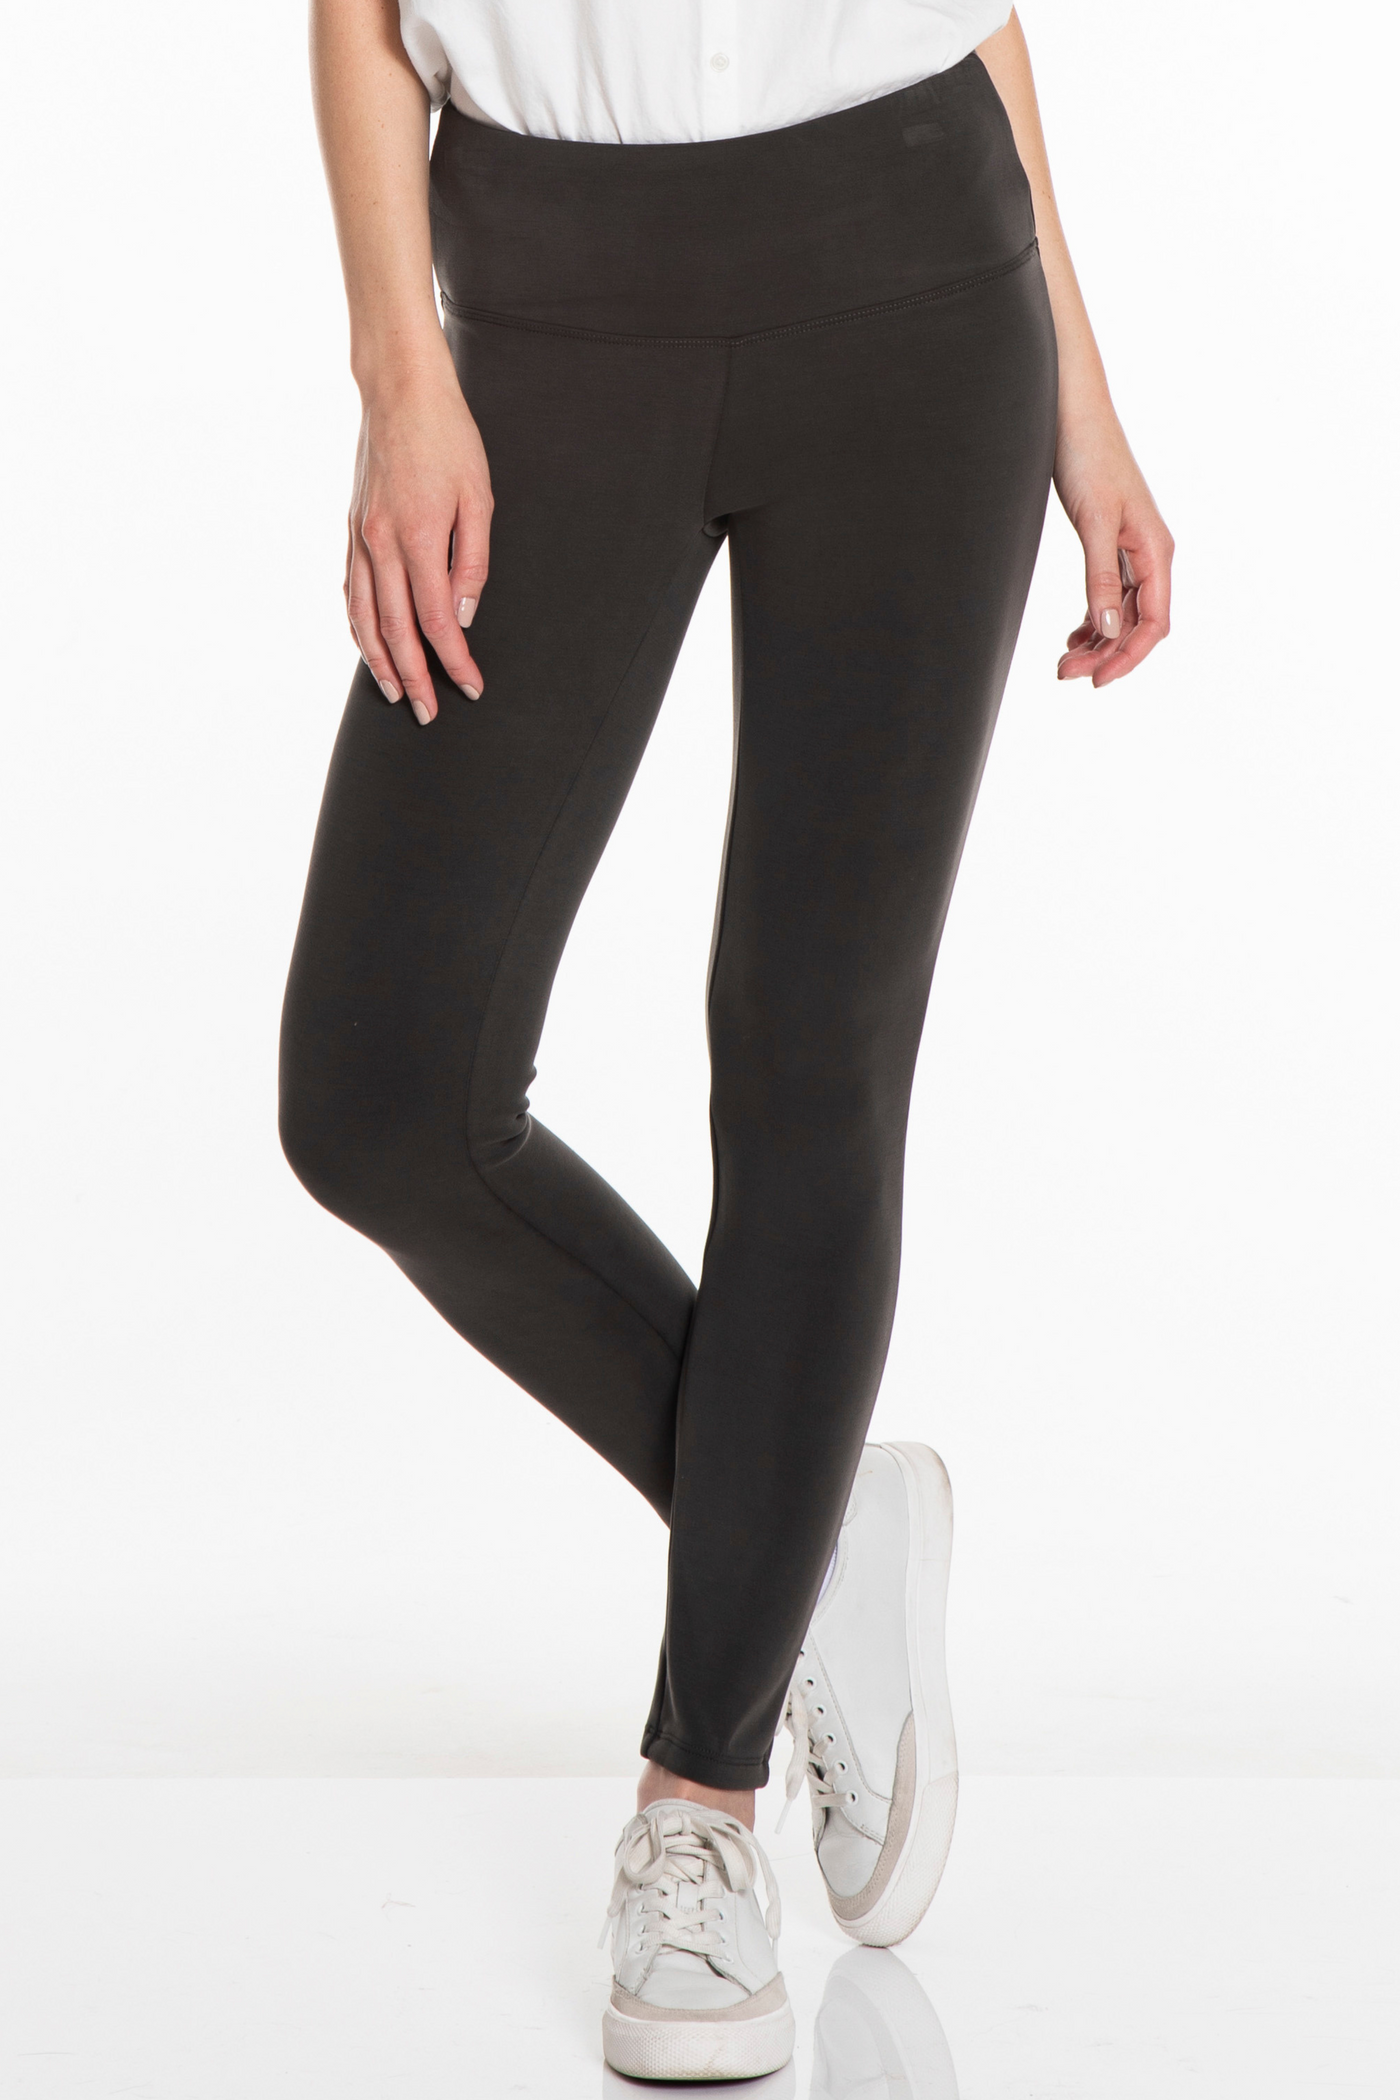 PLUS WIDE BAND PULL-ON ANKLE LEGGING - Deep Charcoal